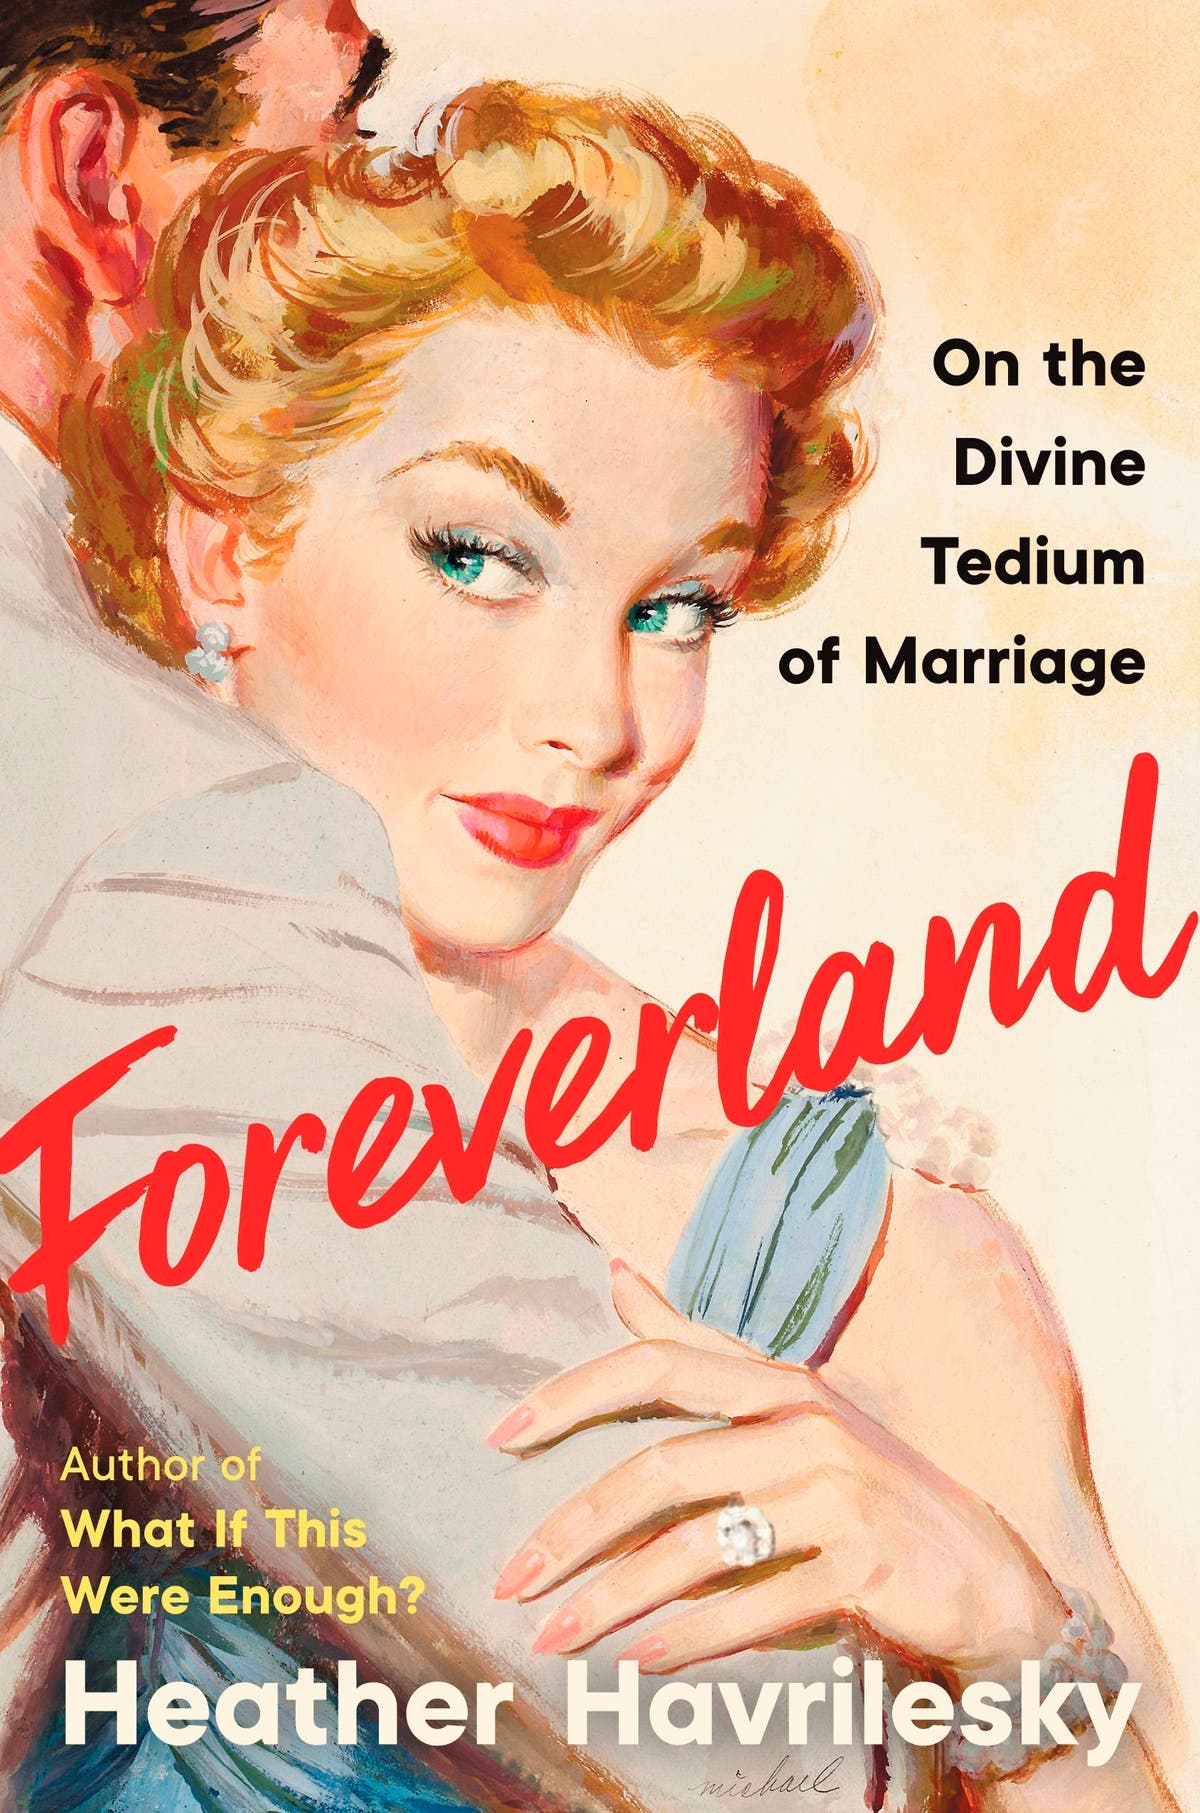 Review: A wise, witty memoir on 'divine tedium' of marriage 